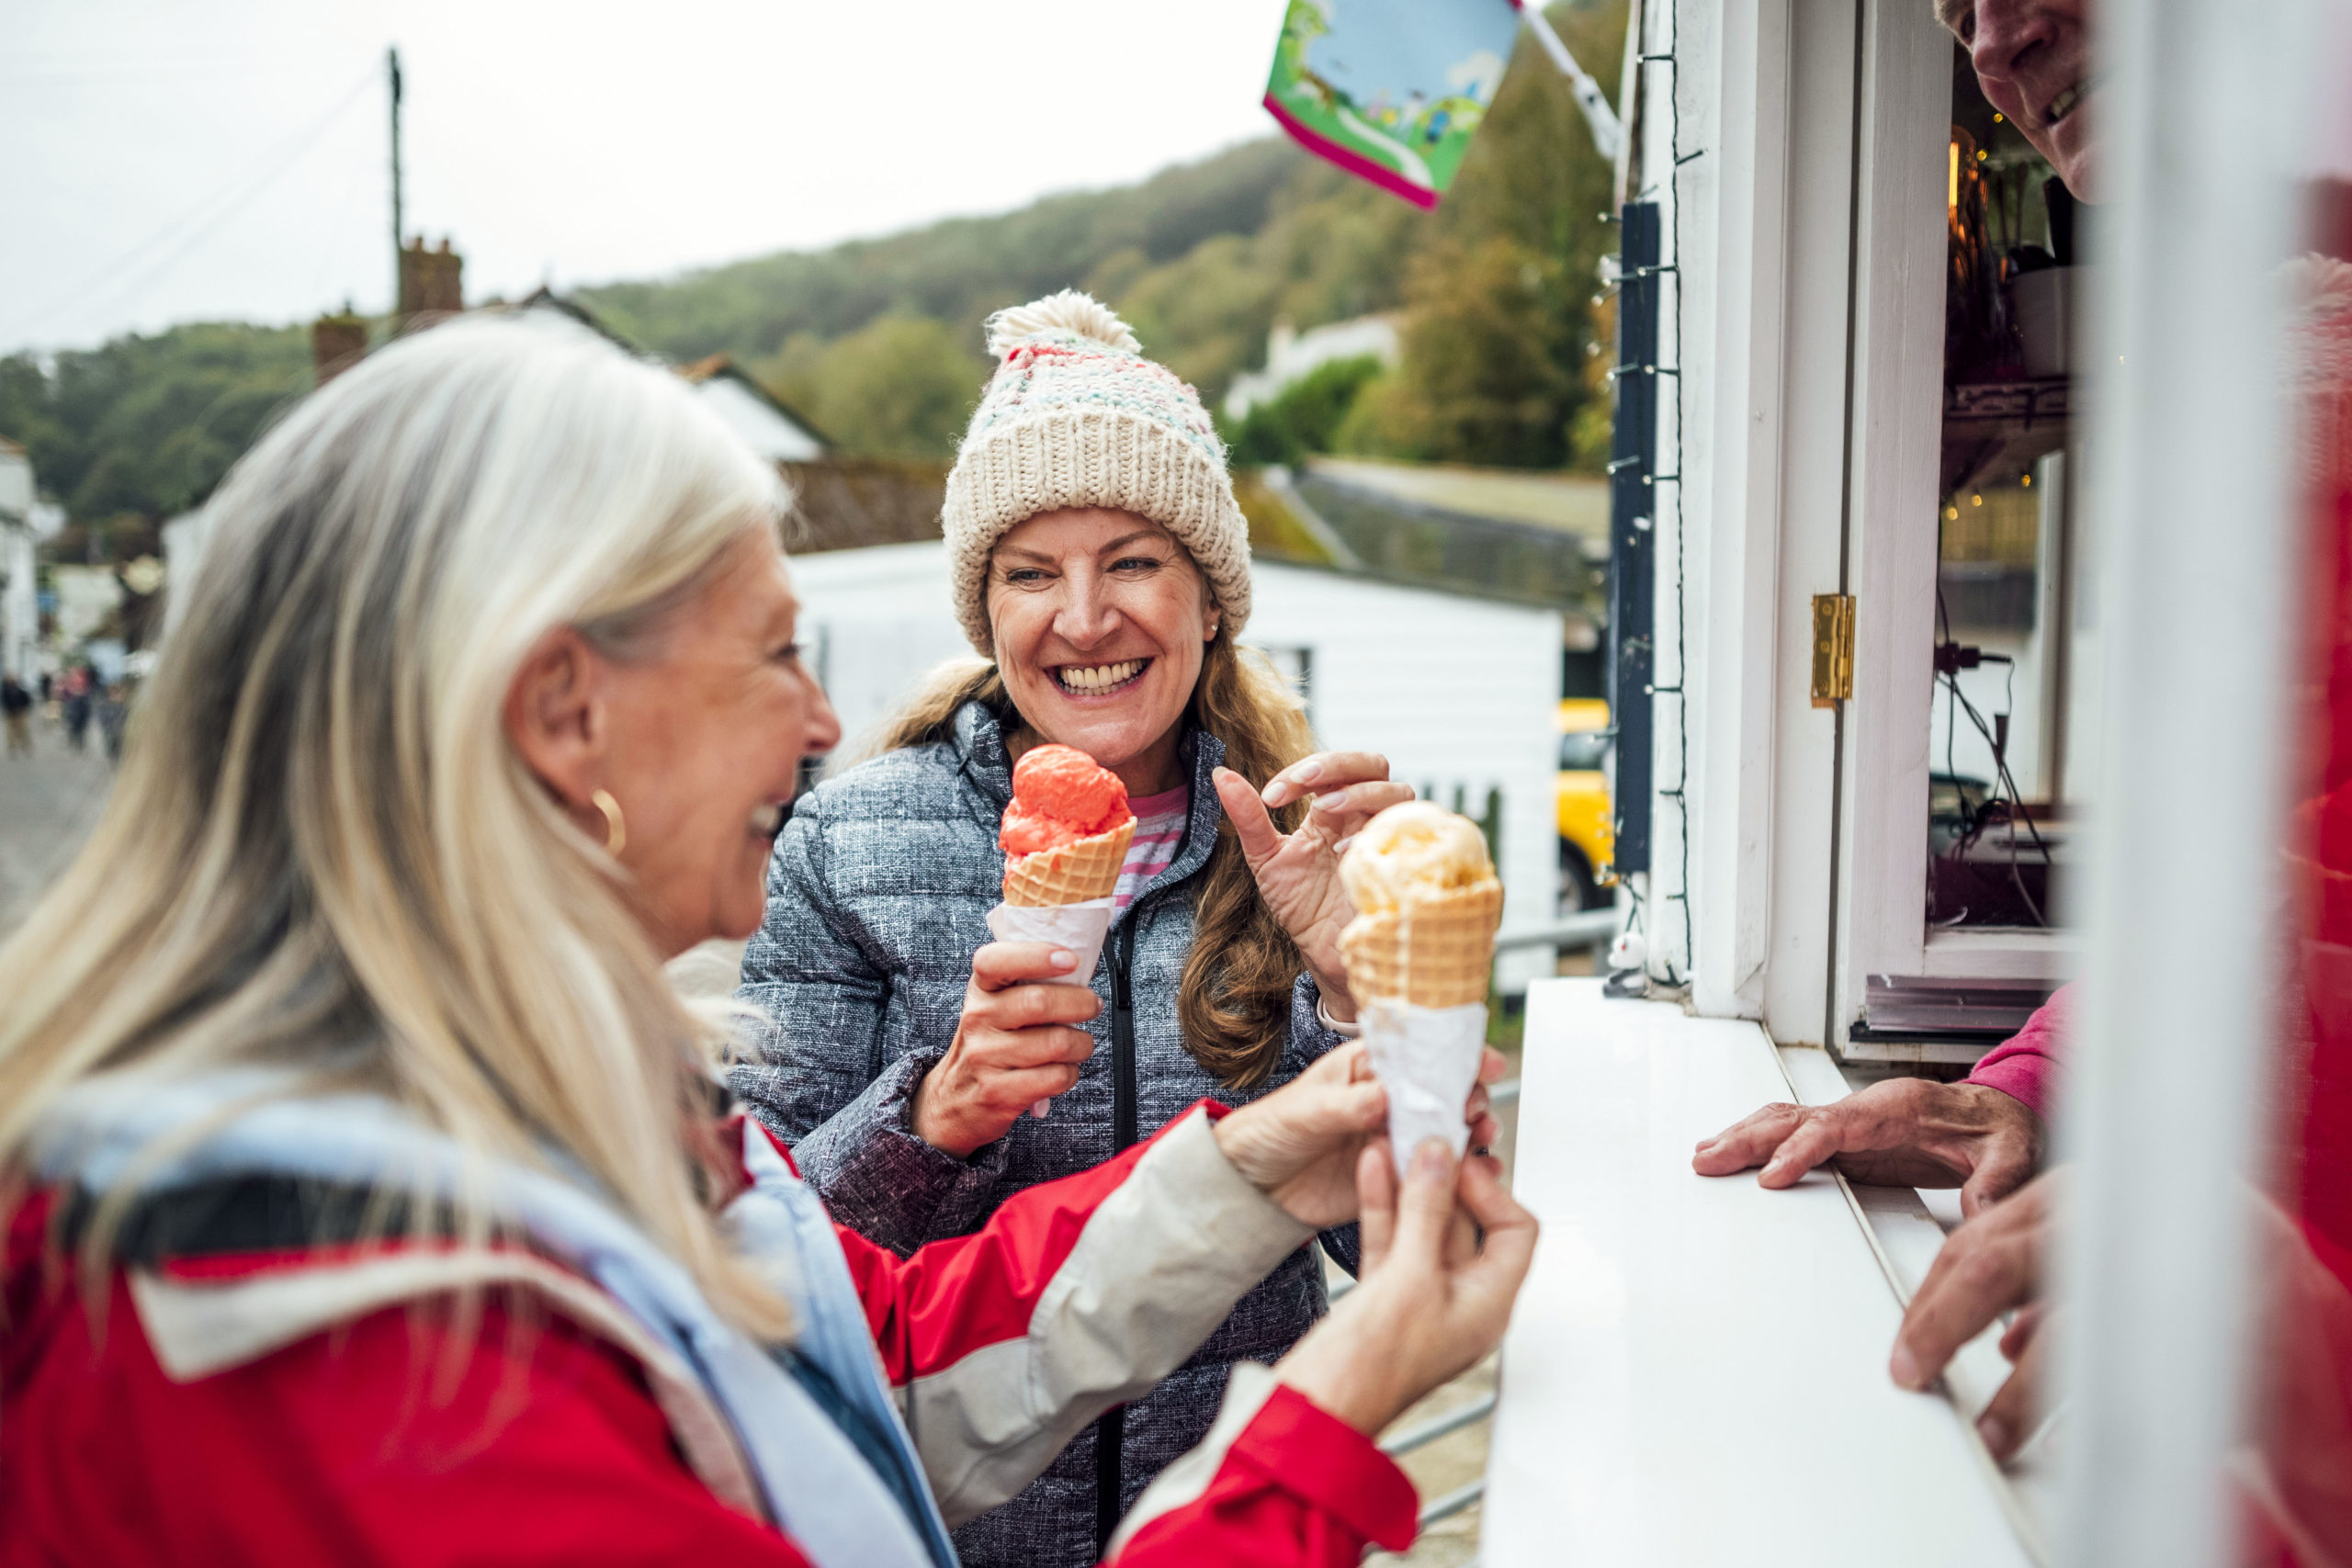 A shot of two mature women getting ice-creams from an ice cream parlor in Cornwall.